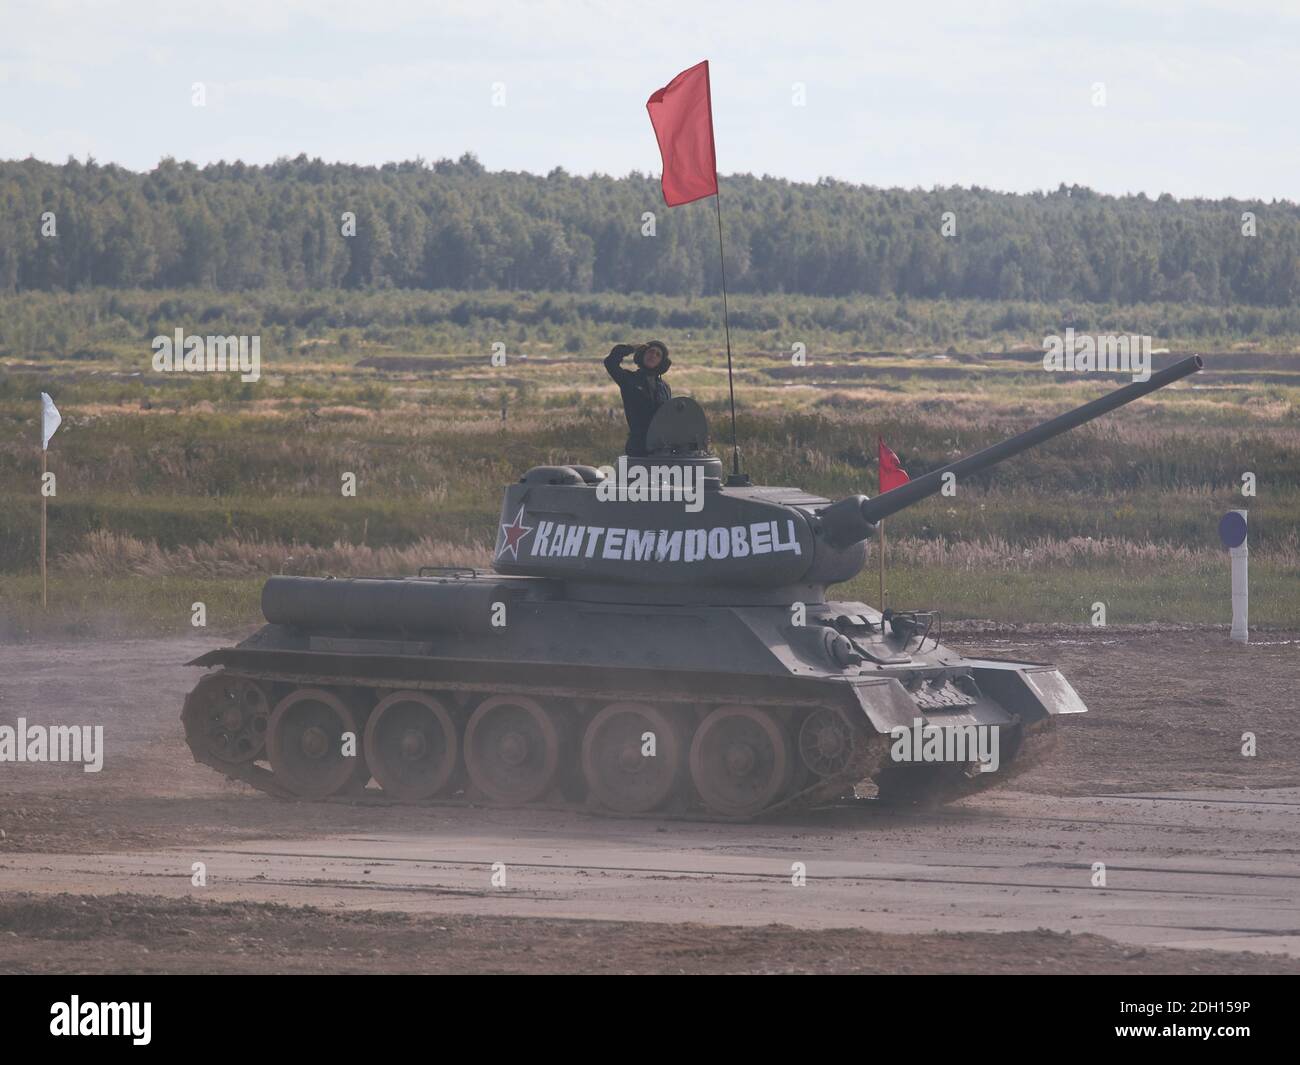 The T-34 tank commander greets the audience during the competition.The day of the opening of the International Army Games 'ARMY-2020', tank crews took place on the glorious Soviet T-34 tanks, the best tanks of the Second World War. In 2020, the military departments of 19 states, including Belarus, Kazakhstan, China and Russia, took part in the Tank Biathlon competition, whose teams were multiple winners and prize-winners of the competition. Stock Photo